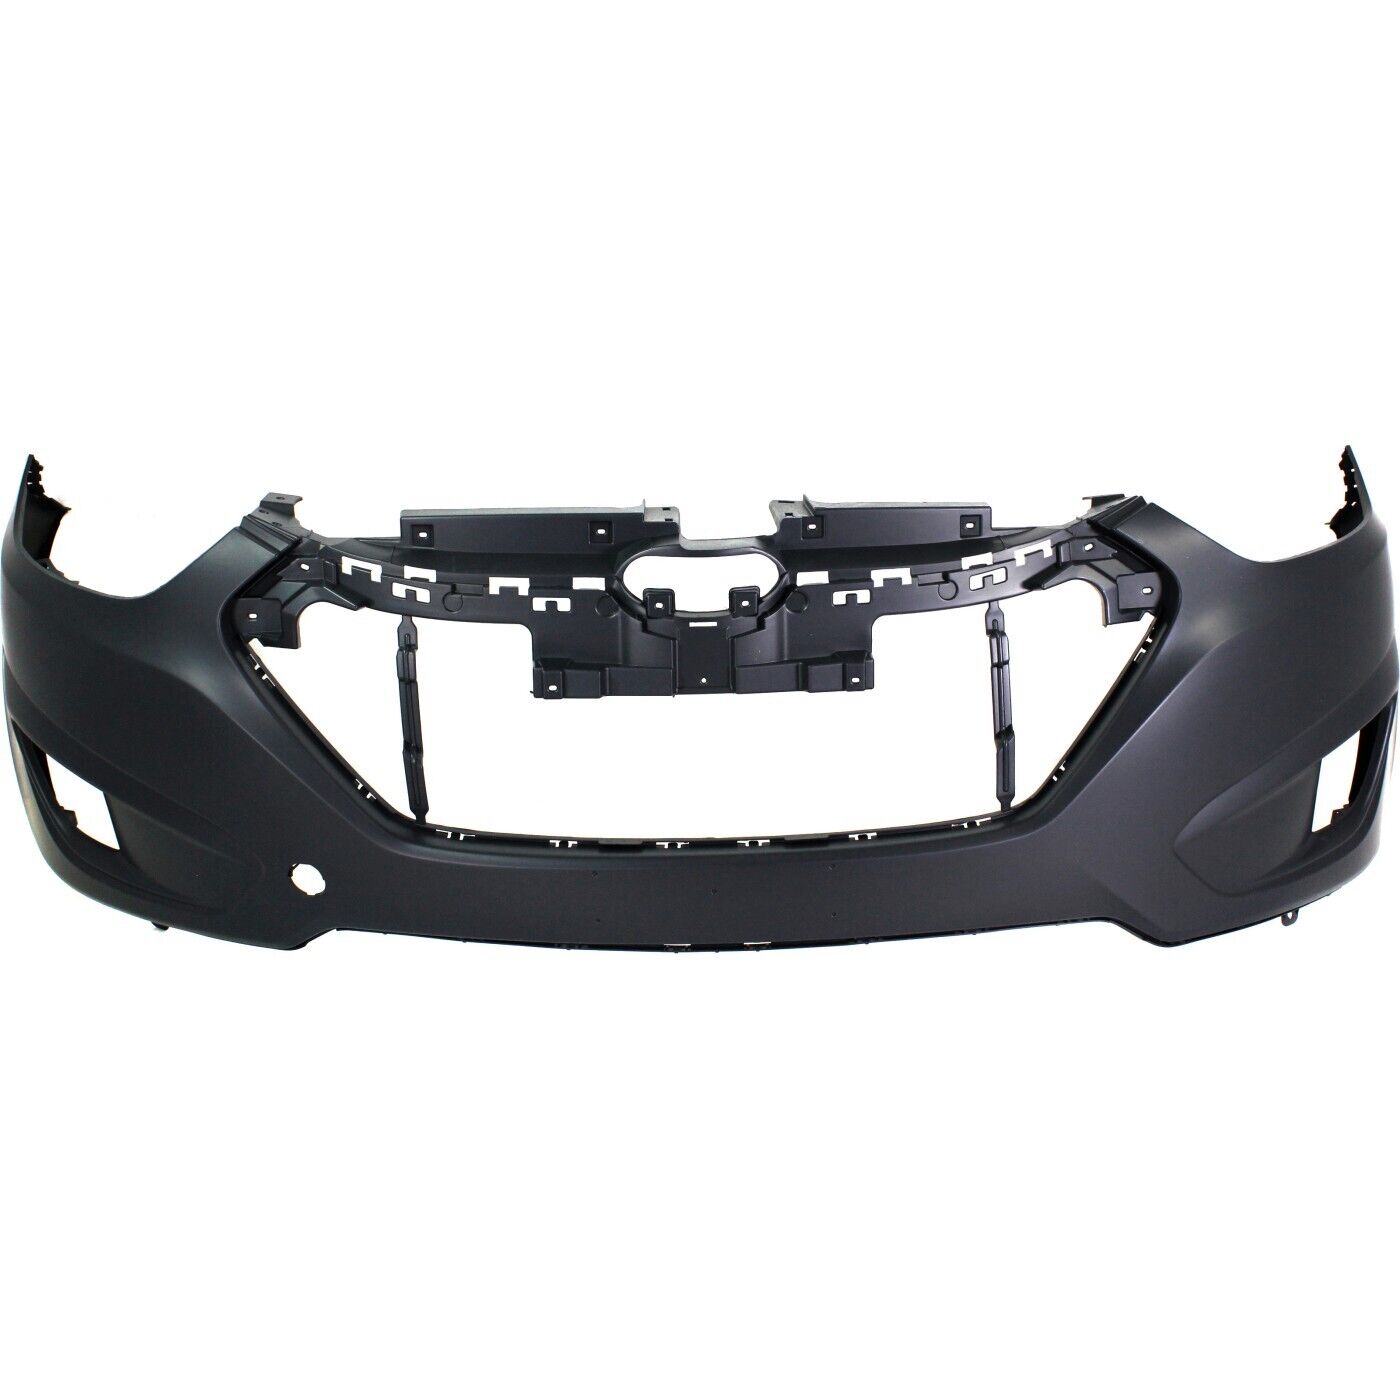 Front Bumper Cover For 2010-2015 Hyundai Tucson w/ fog lamp holes Primed